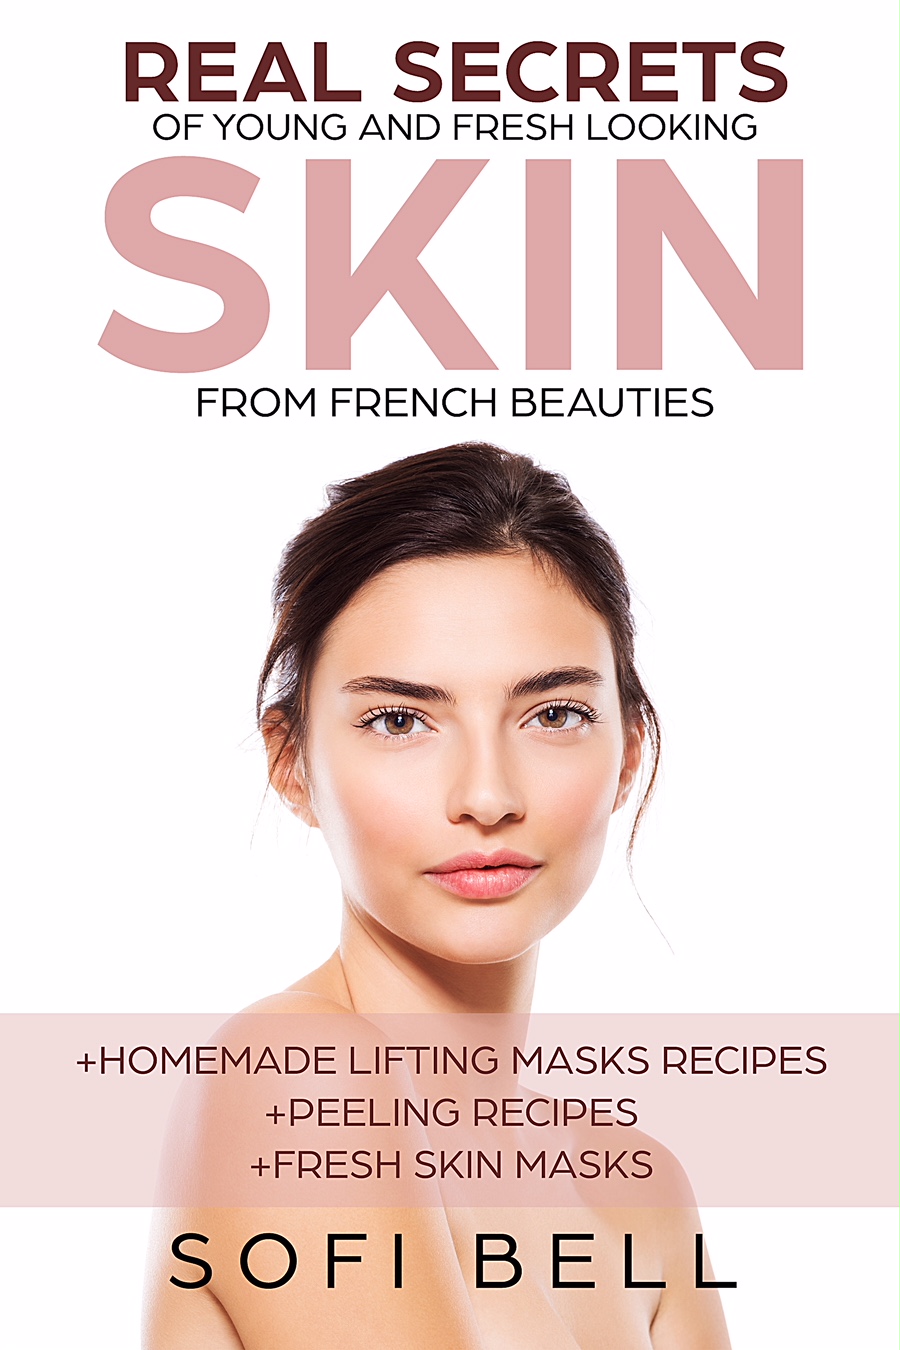 Real Secrets Of Young And Fresh Looking Skin From French Beauties